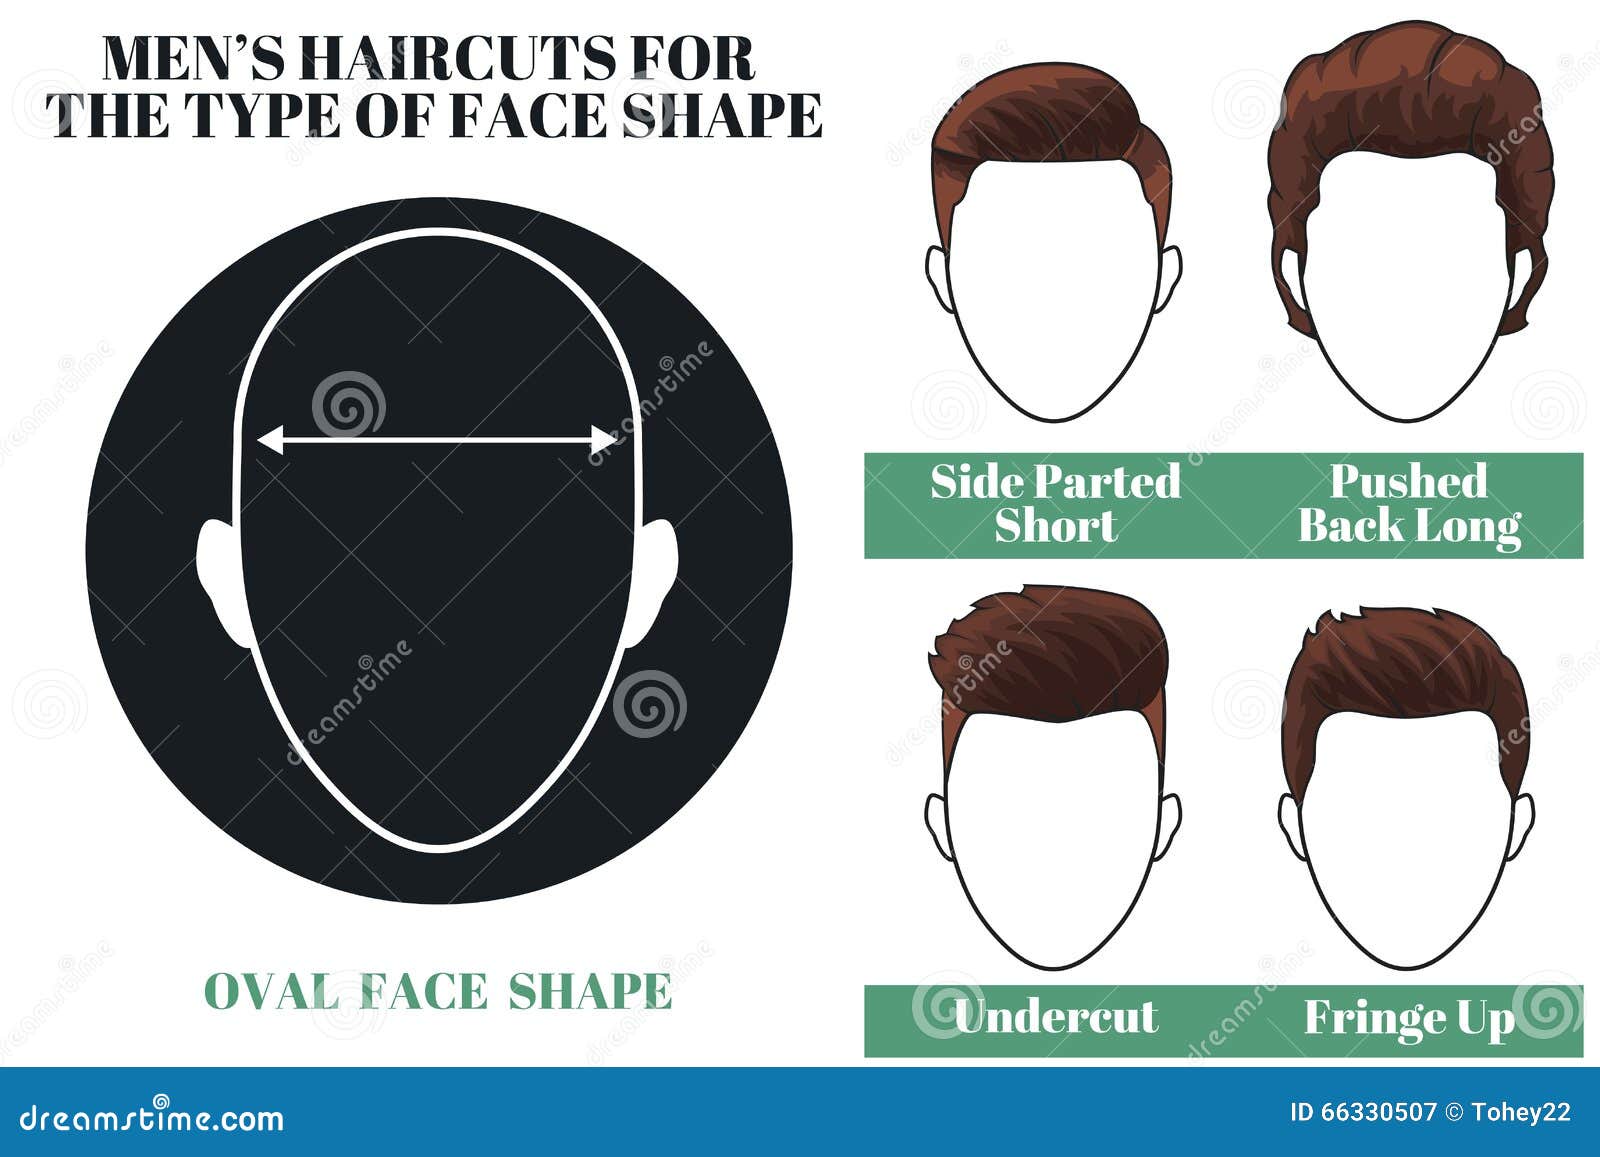 45 Men's Hairstyles for Oval Faces for the Perfect Look | Men Hairstylist | Oval  face haircuts, Oval face hairstyles, Cool hairstyles for men